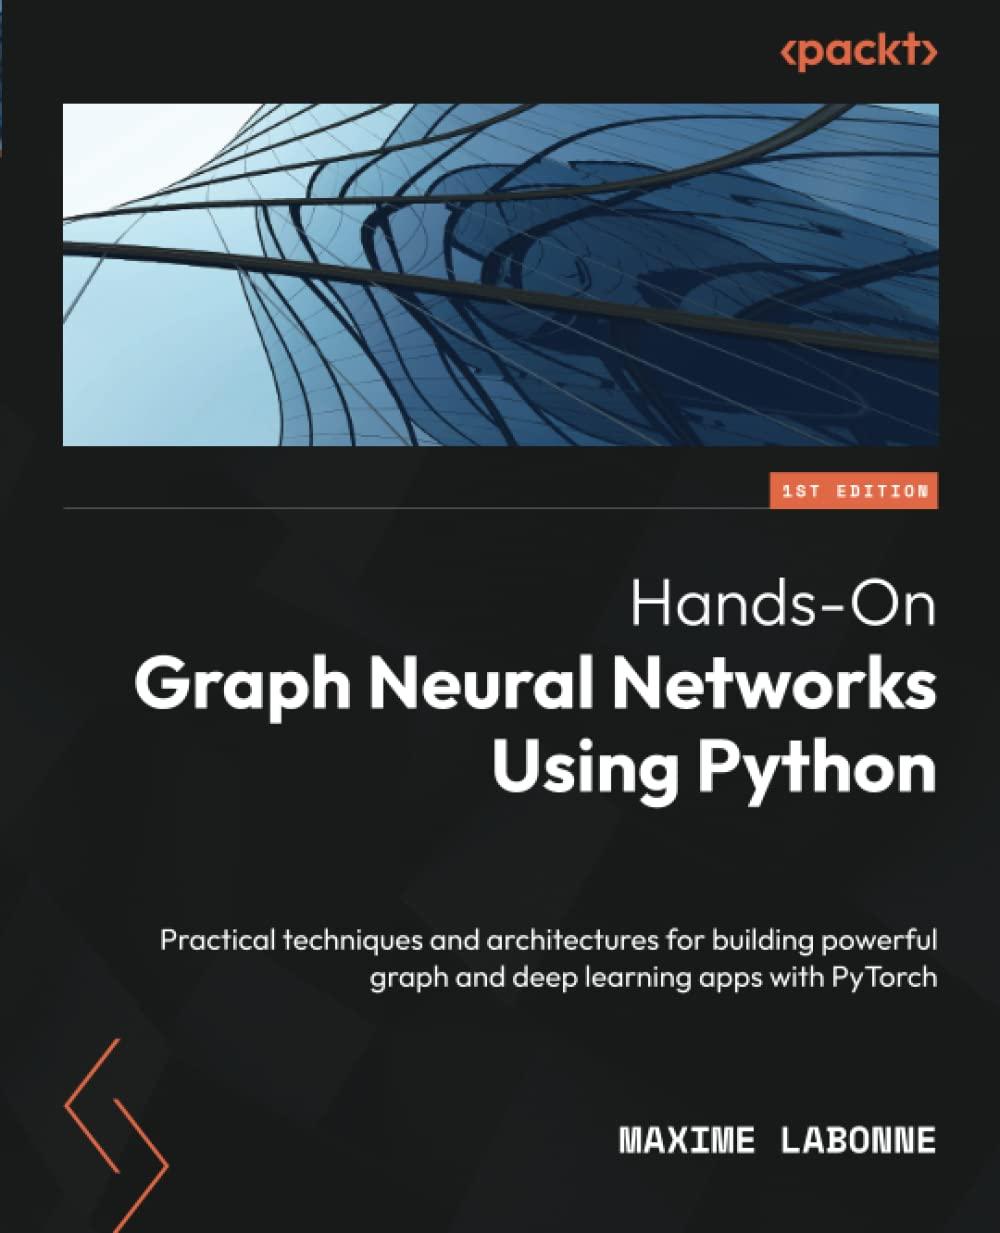 hands on graph neural networks using python practical techniques and architectures for building powerful